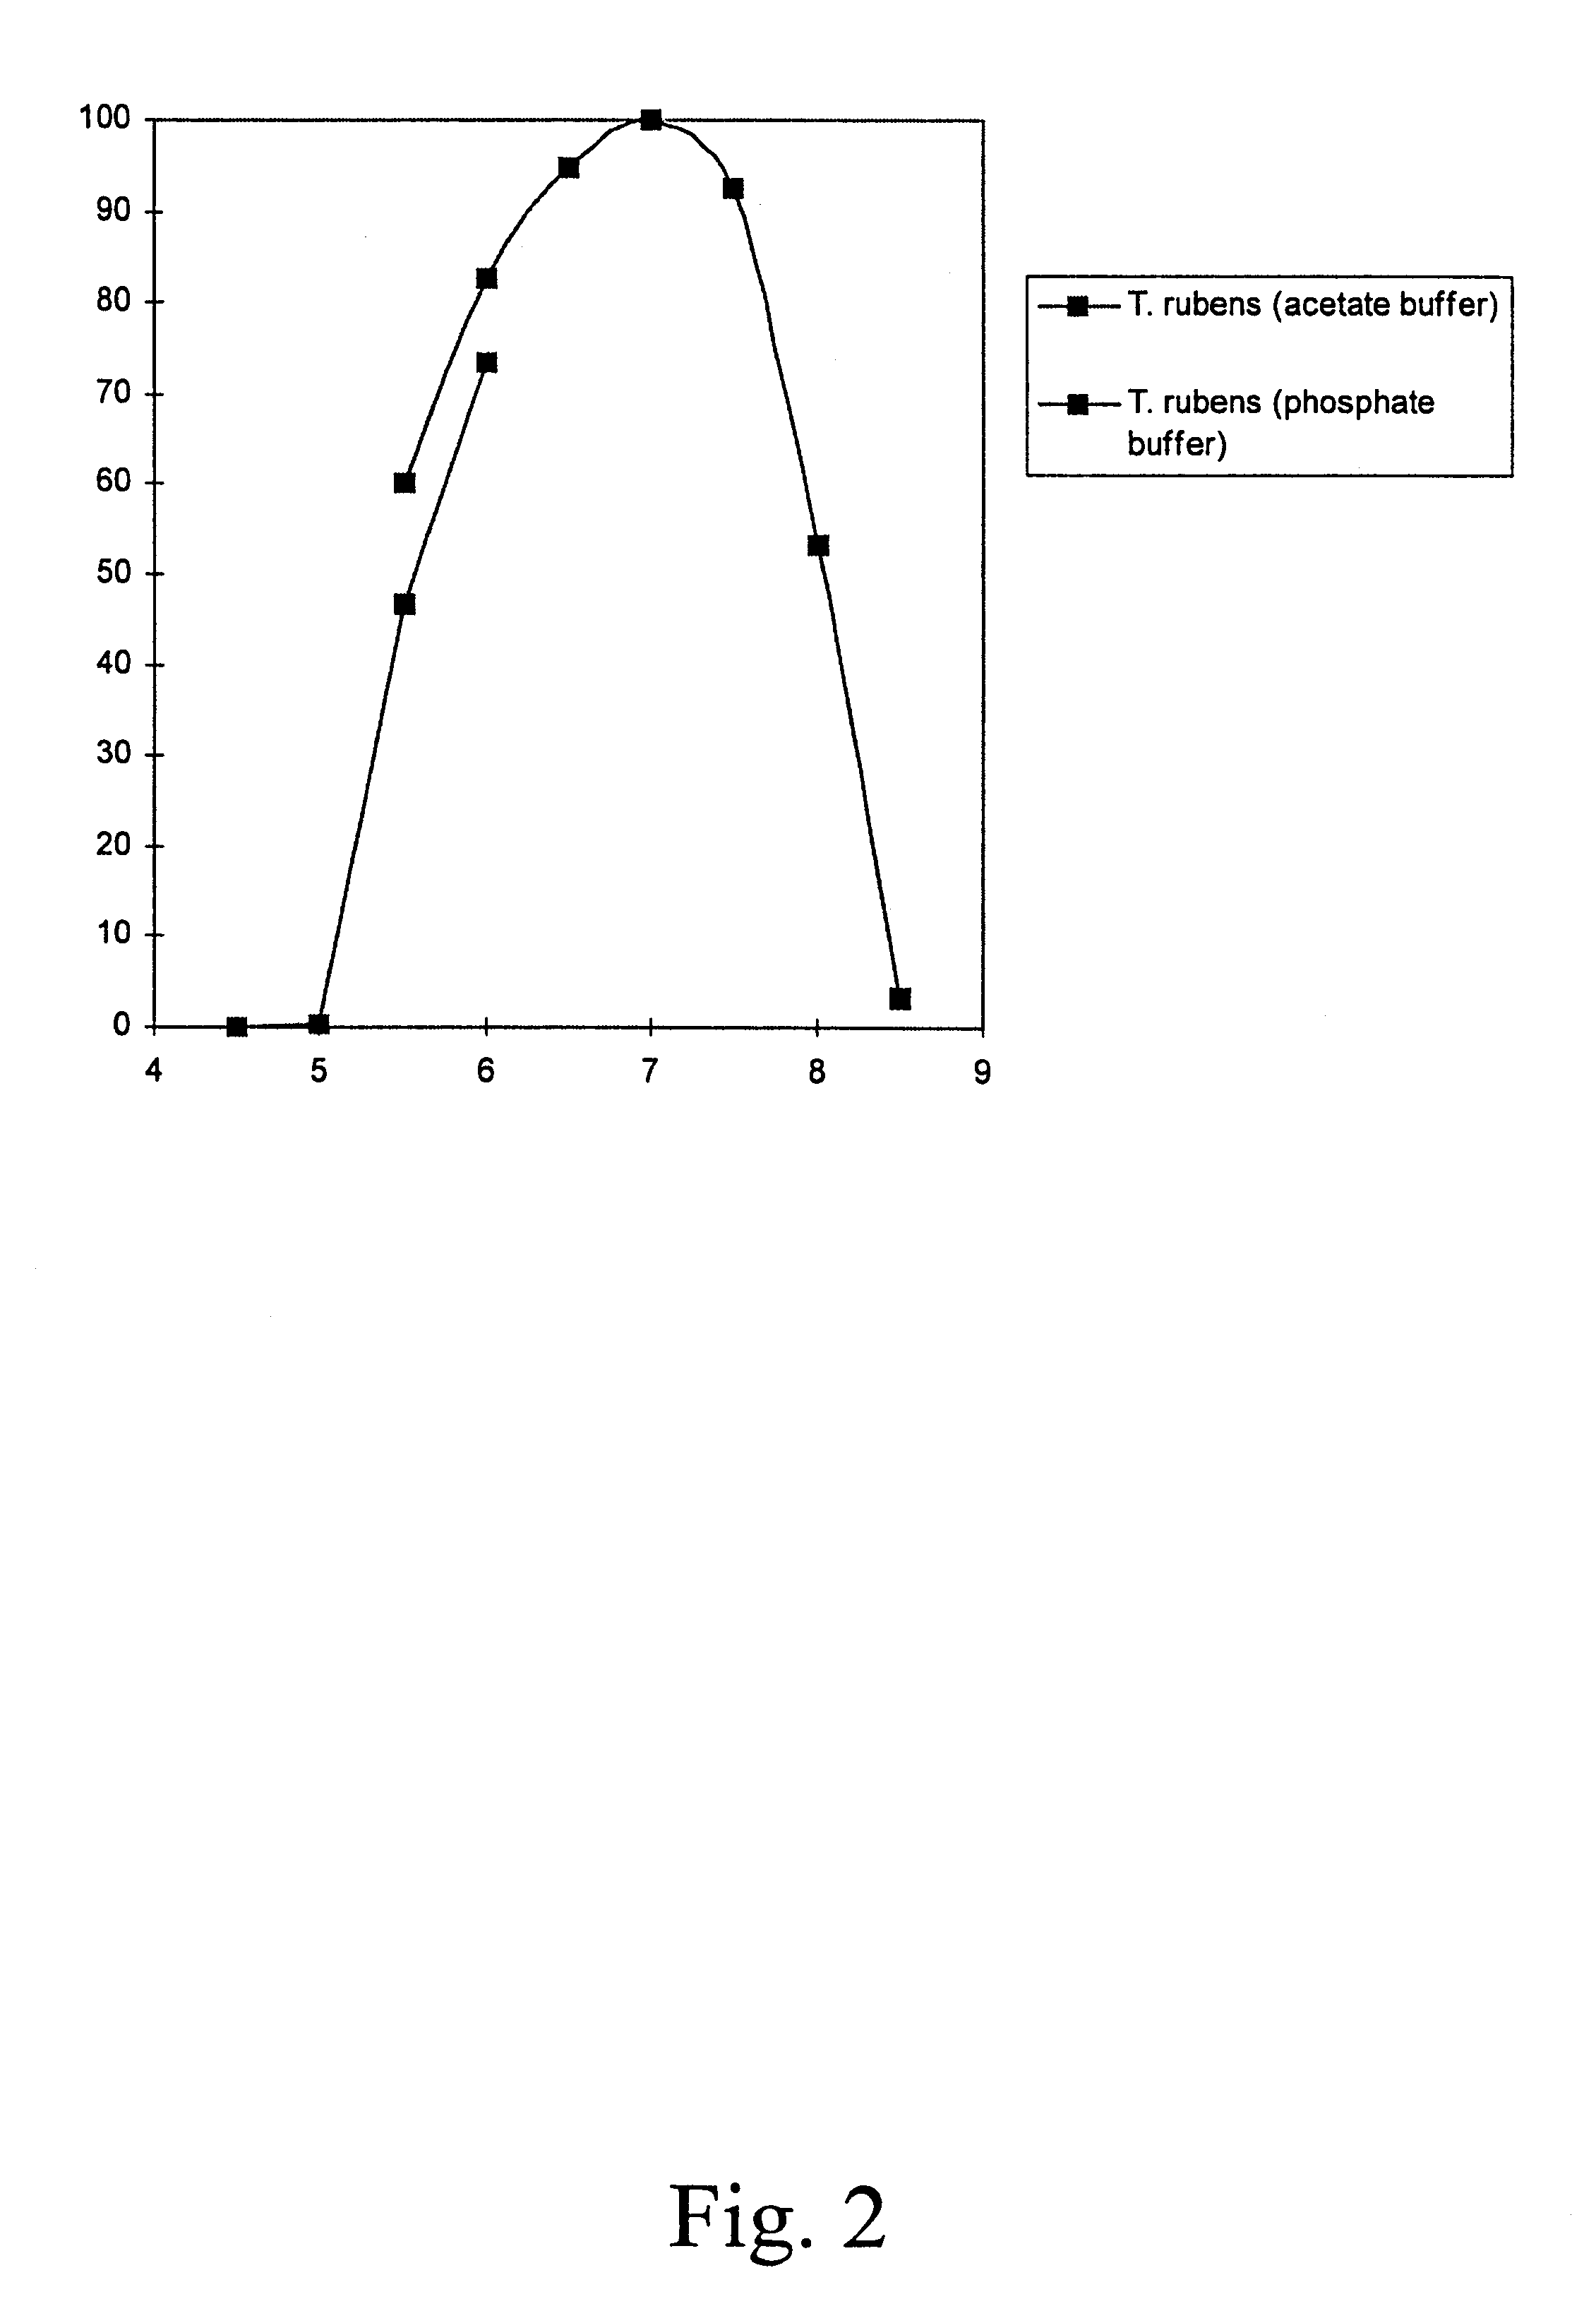 Polypeptides having glucanotransferase activity and nucleic acids encoding same